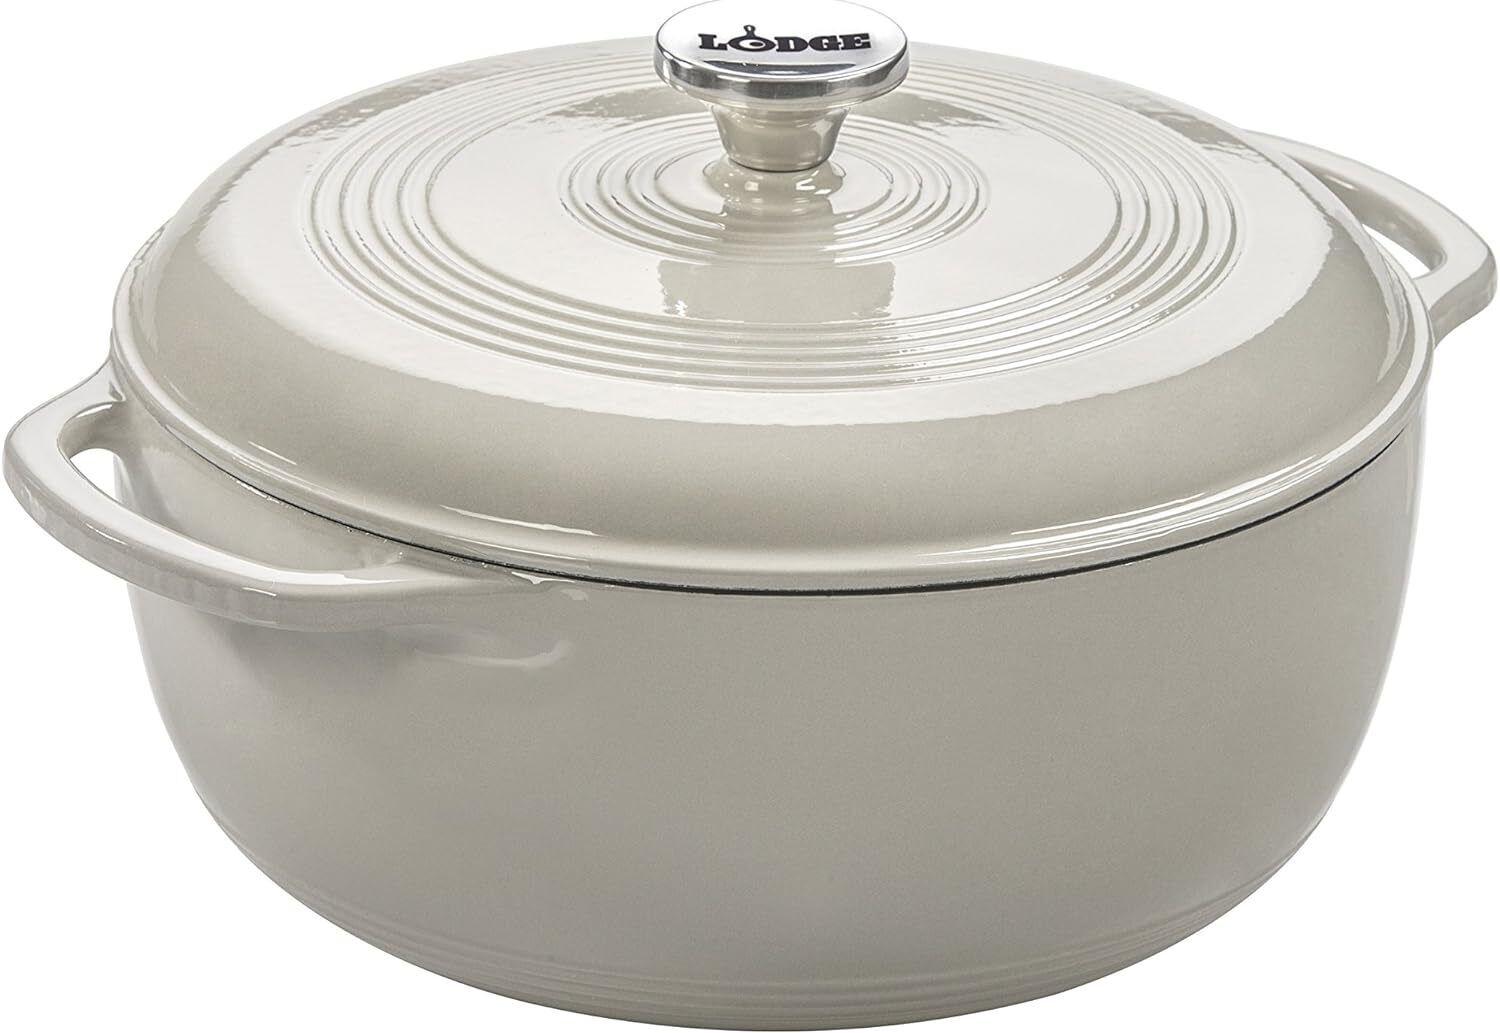 Lodge 6 Quart Enameled Cast Iron Dutch Oven with Lid – Dual Handles – Oven Safe